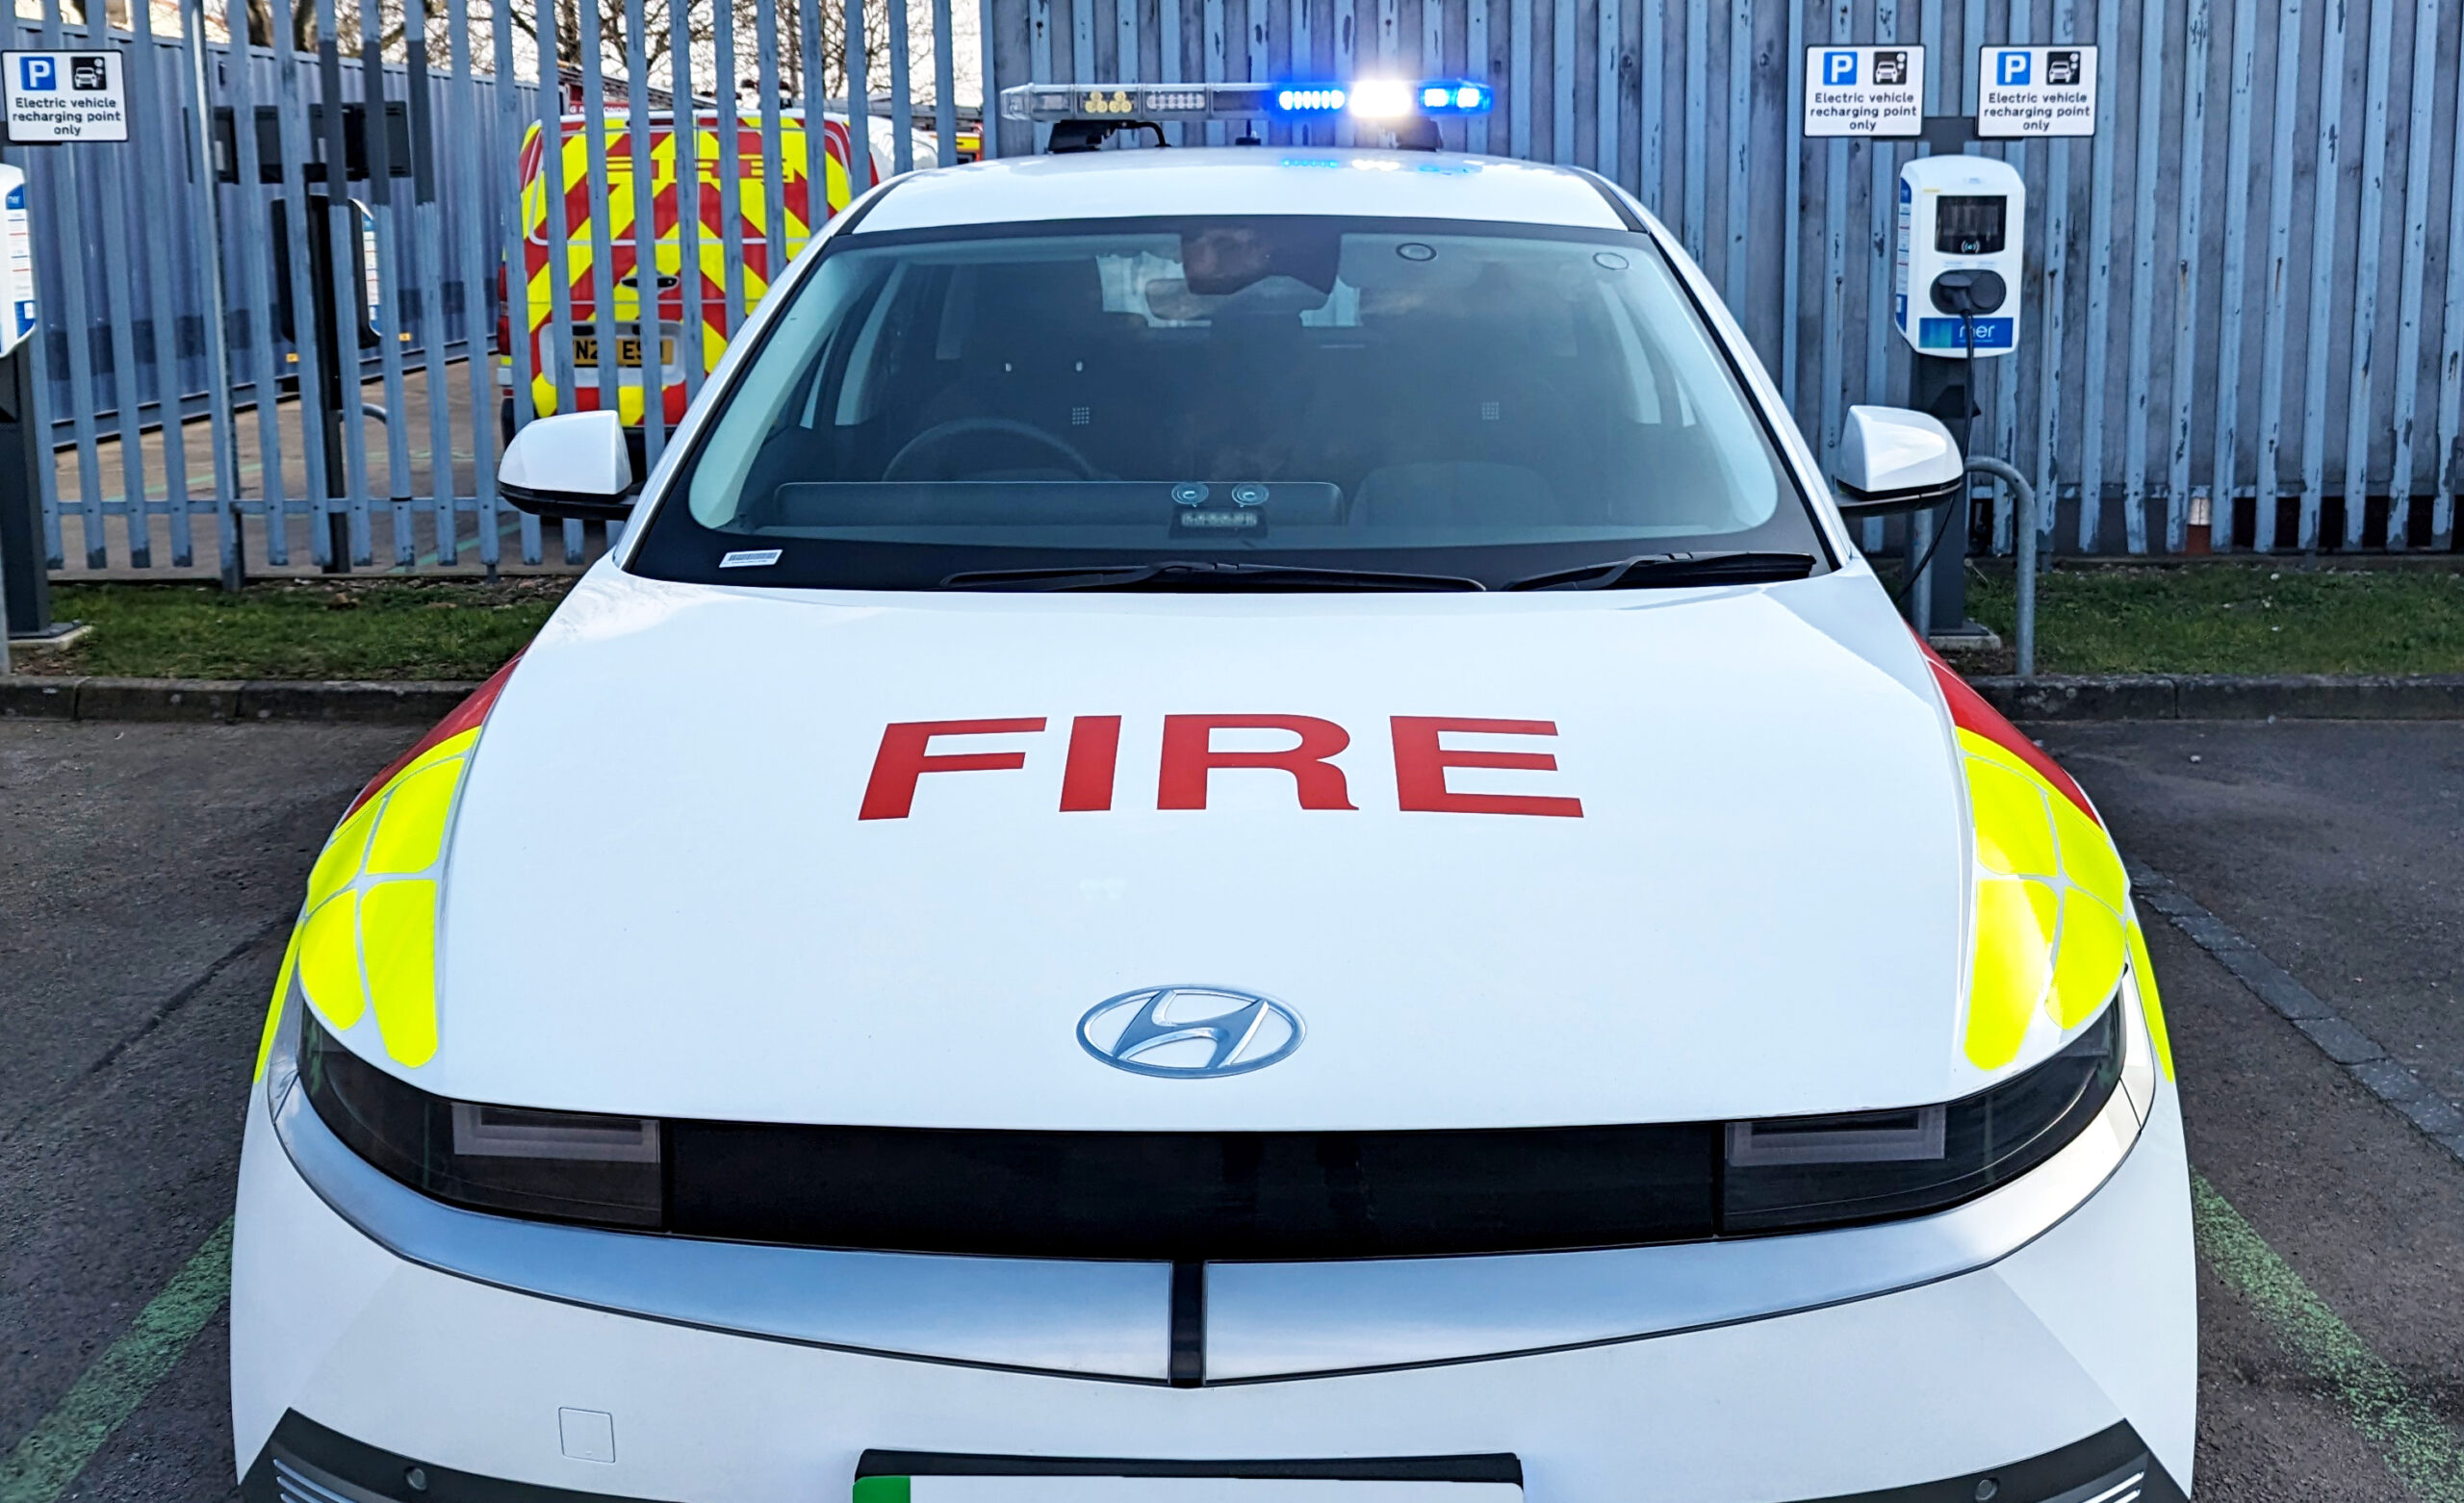 Avon Fire & Rescue Service Hyundai Ioniq Front View with Fire Livery and Blue Lightbar